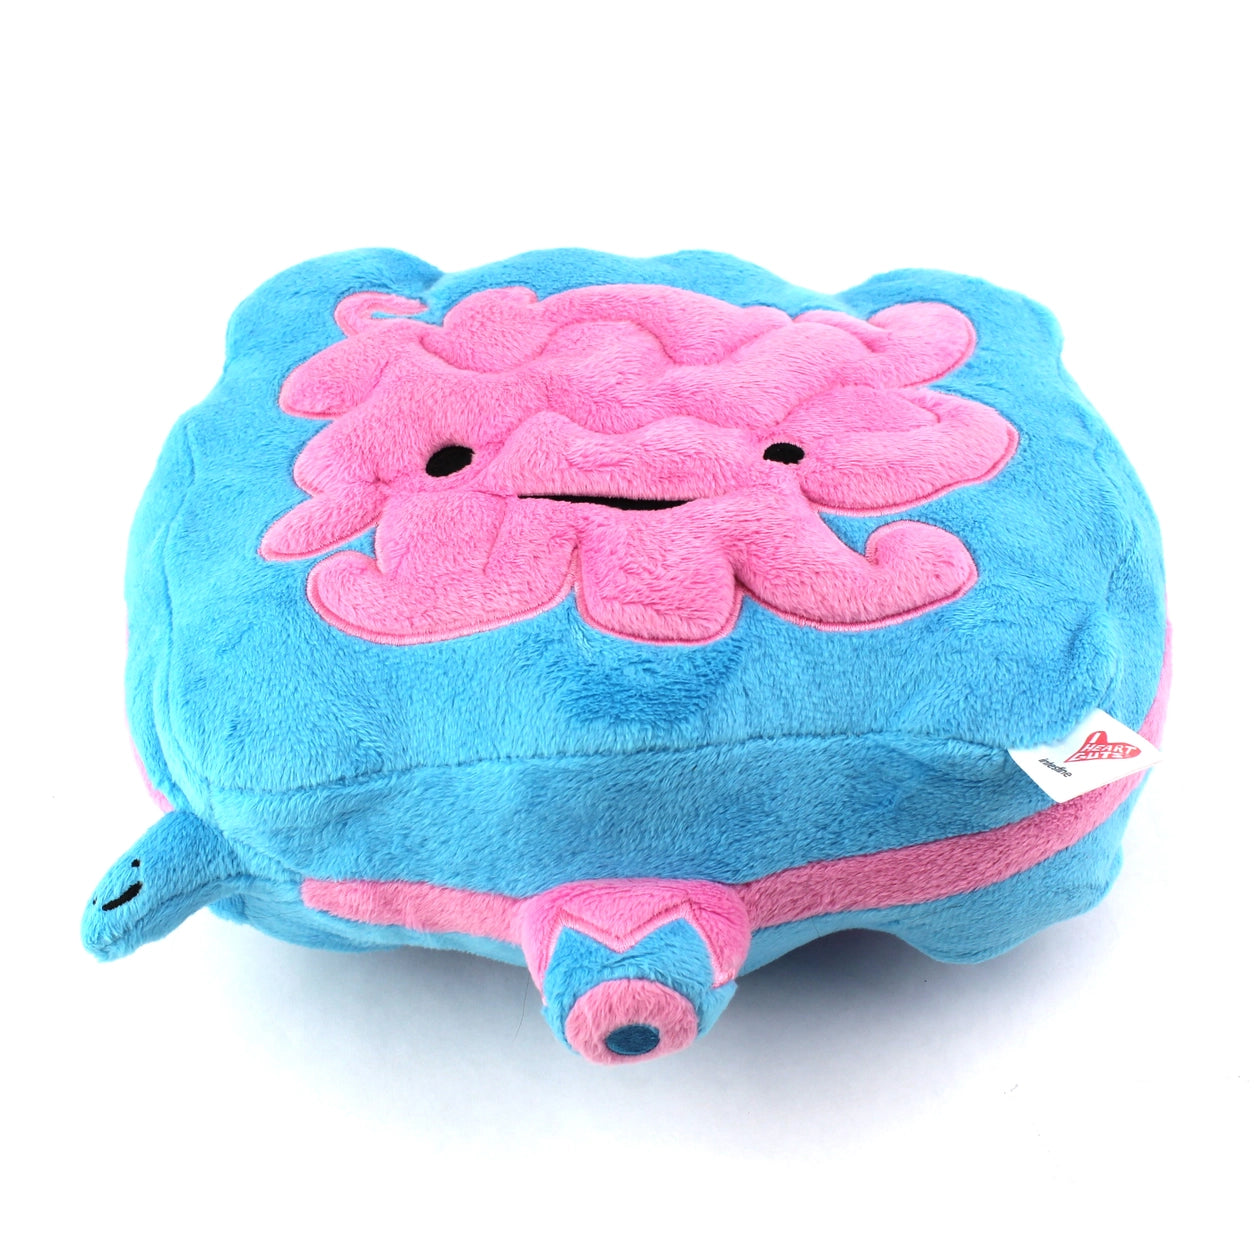 plushie bowels - Go with your gut